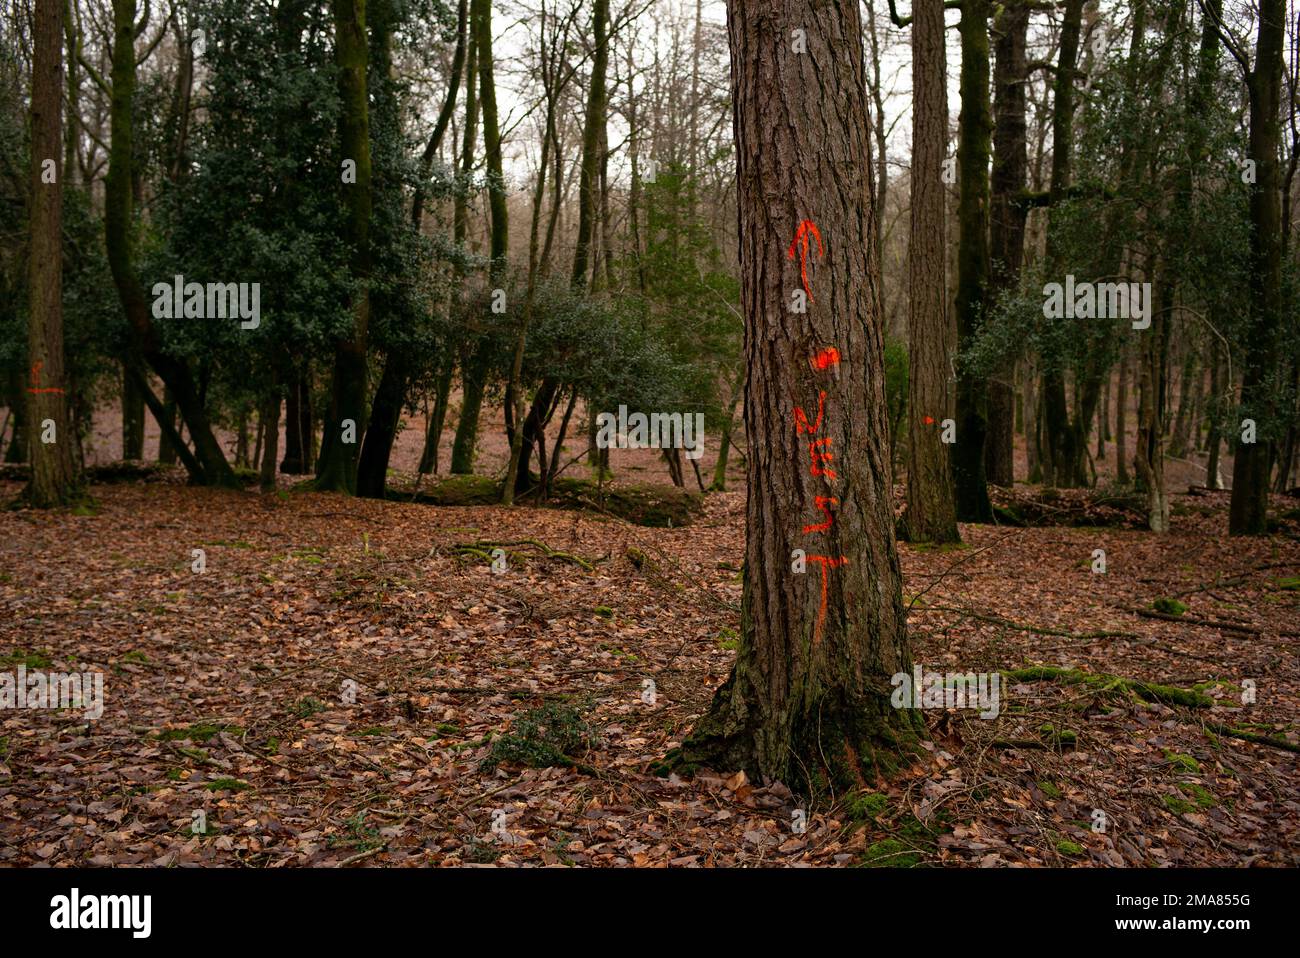 Tree marked with nest in spray paint in the New Forest Hampshire. Part of the forest management work to maintain and thin out woodland biodiversity. Stock Photo